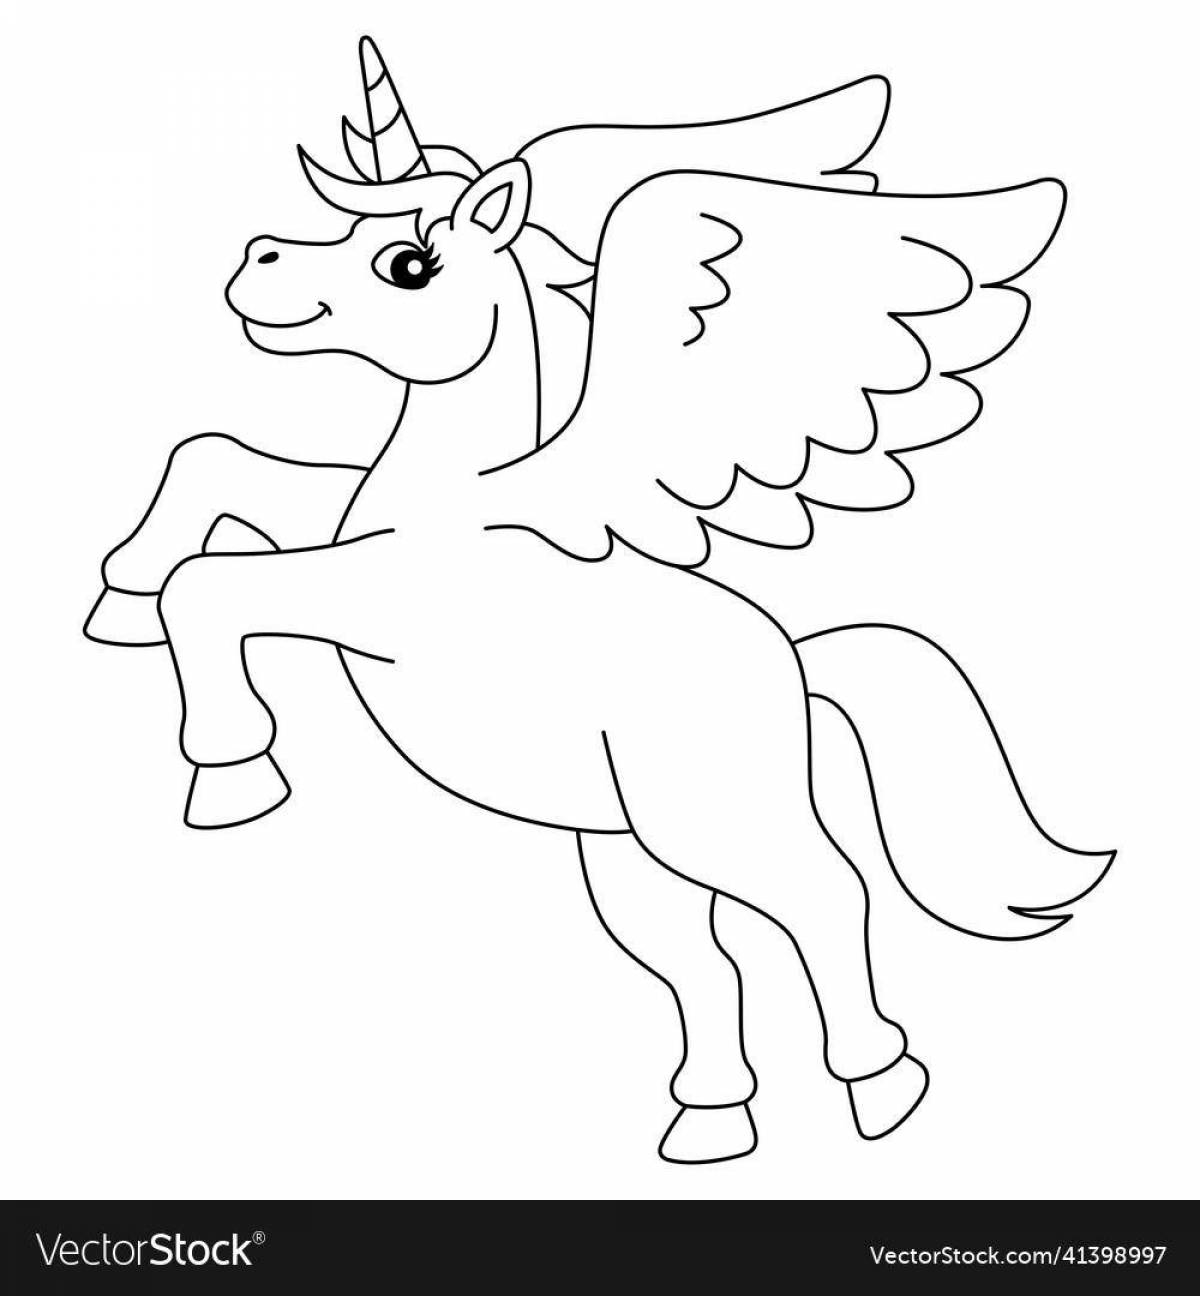 Glowing flying unicorns coloring page